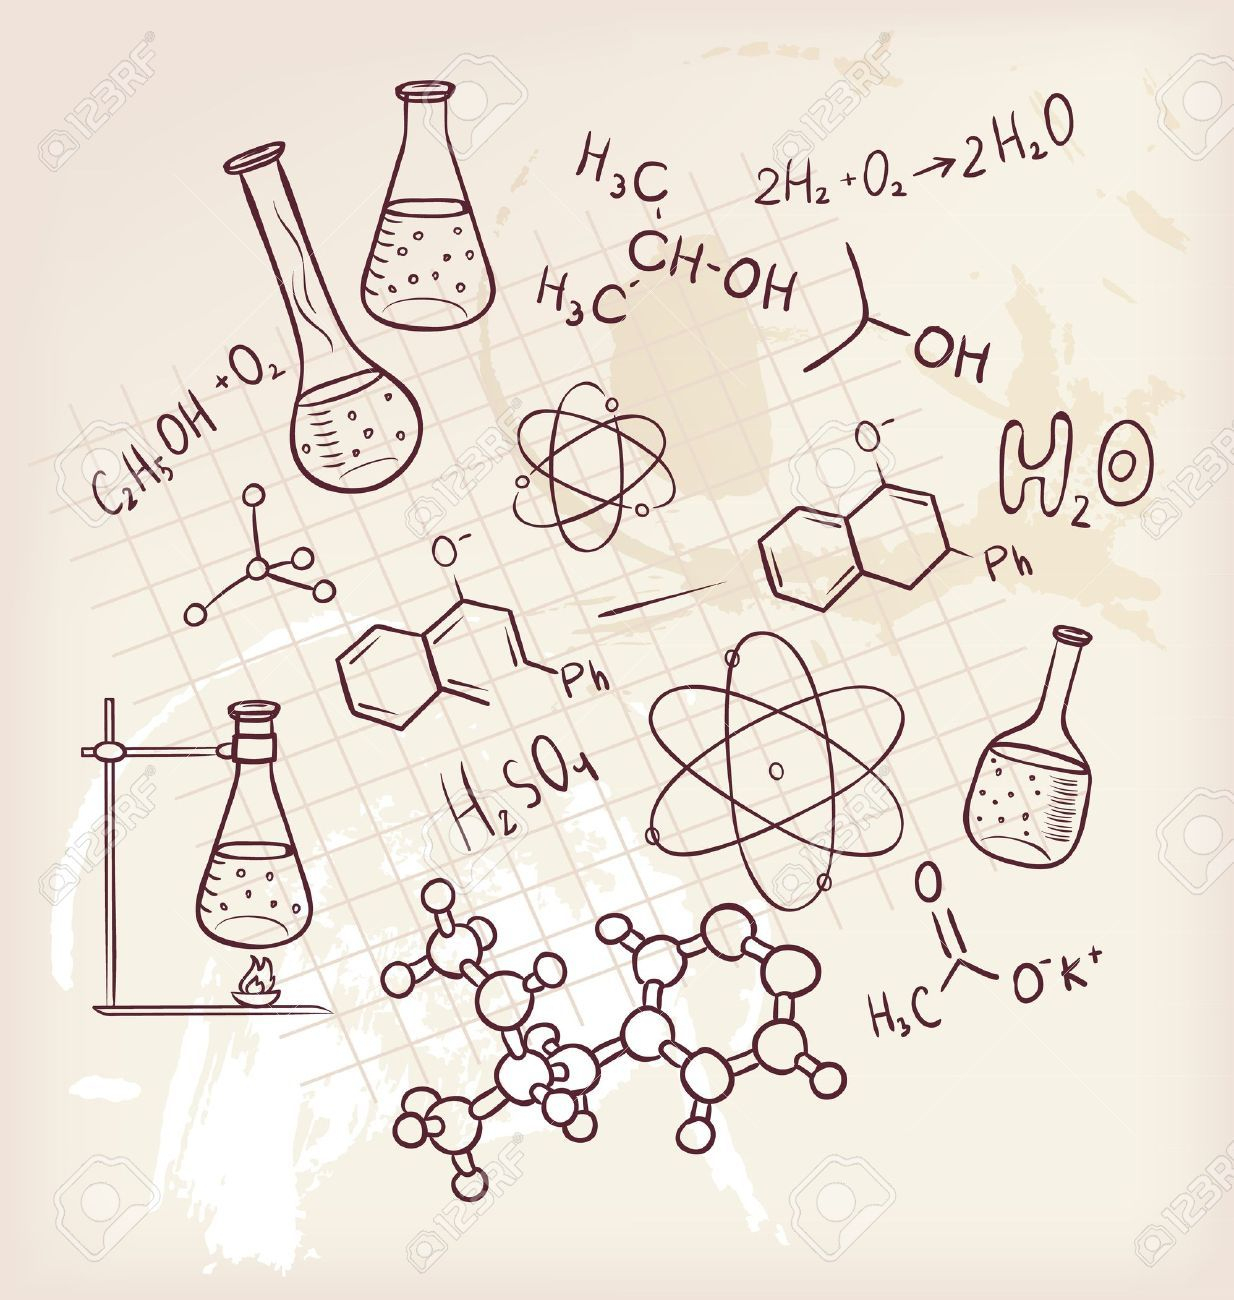 Pin By Kamilla On Desenho | Chemistry Drawing, Chemistry Art, How To pour Page De Garde Phisique Chimie